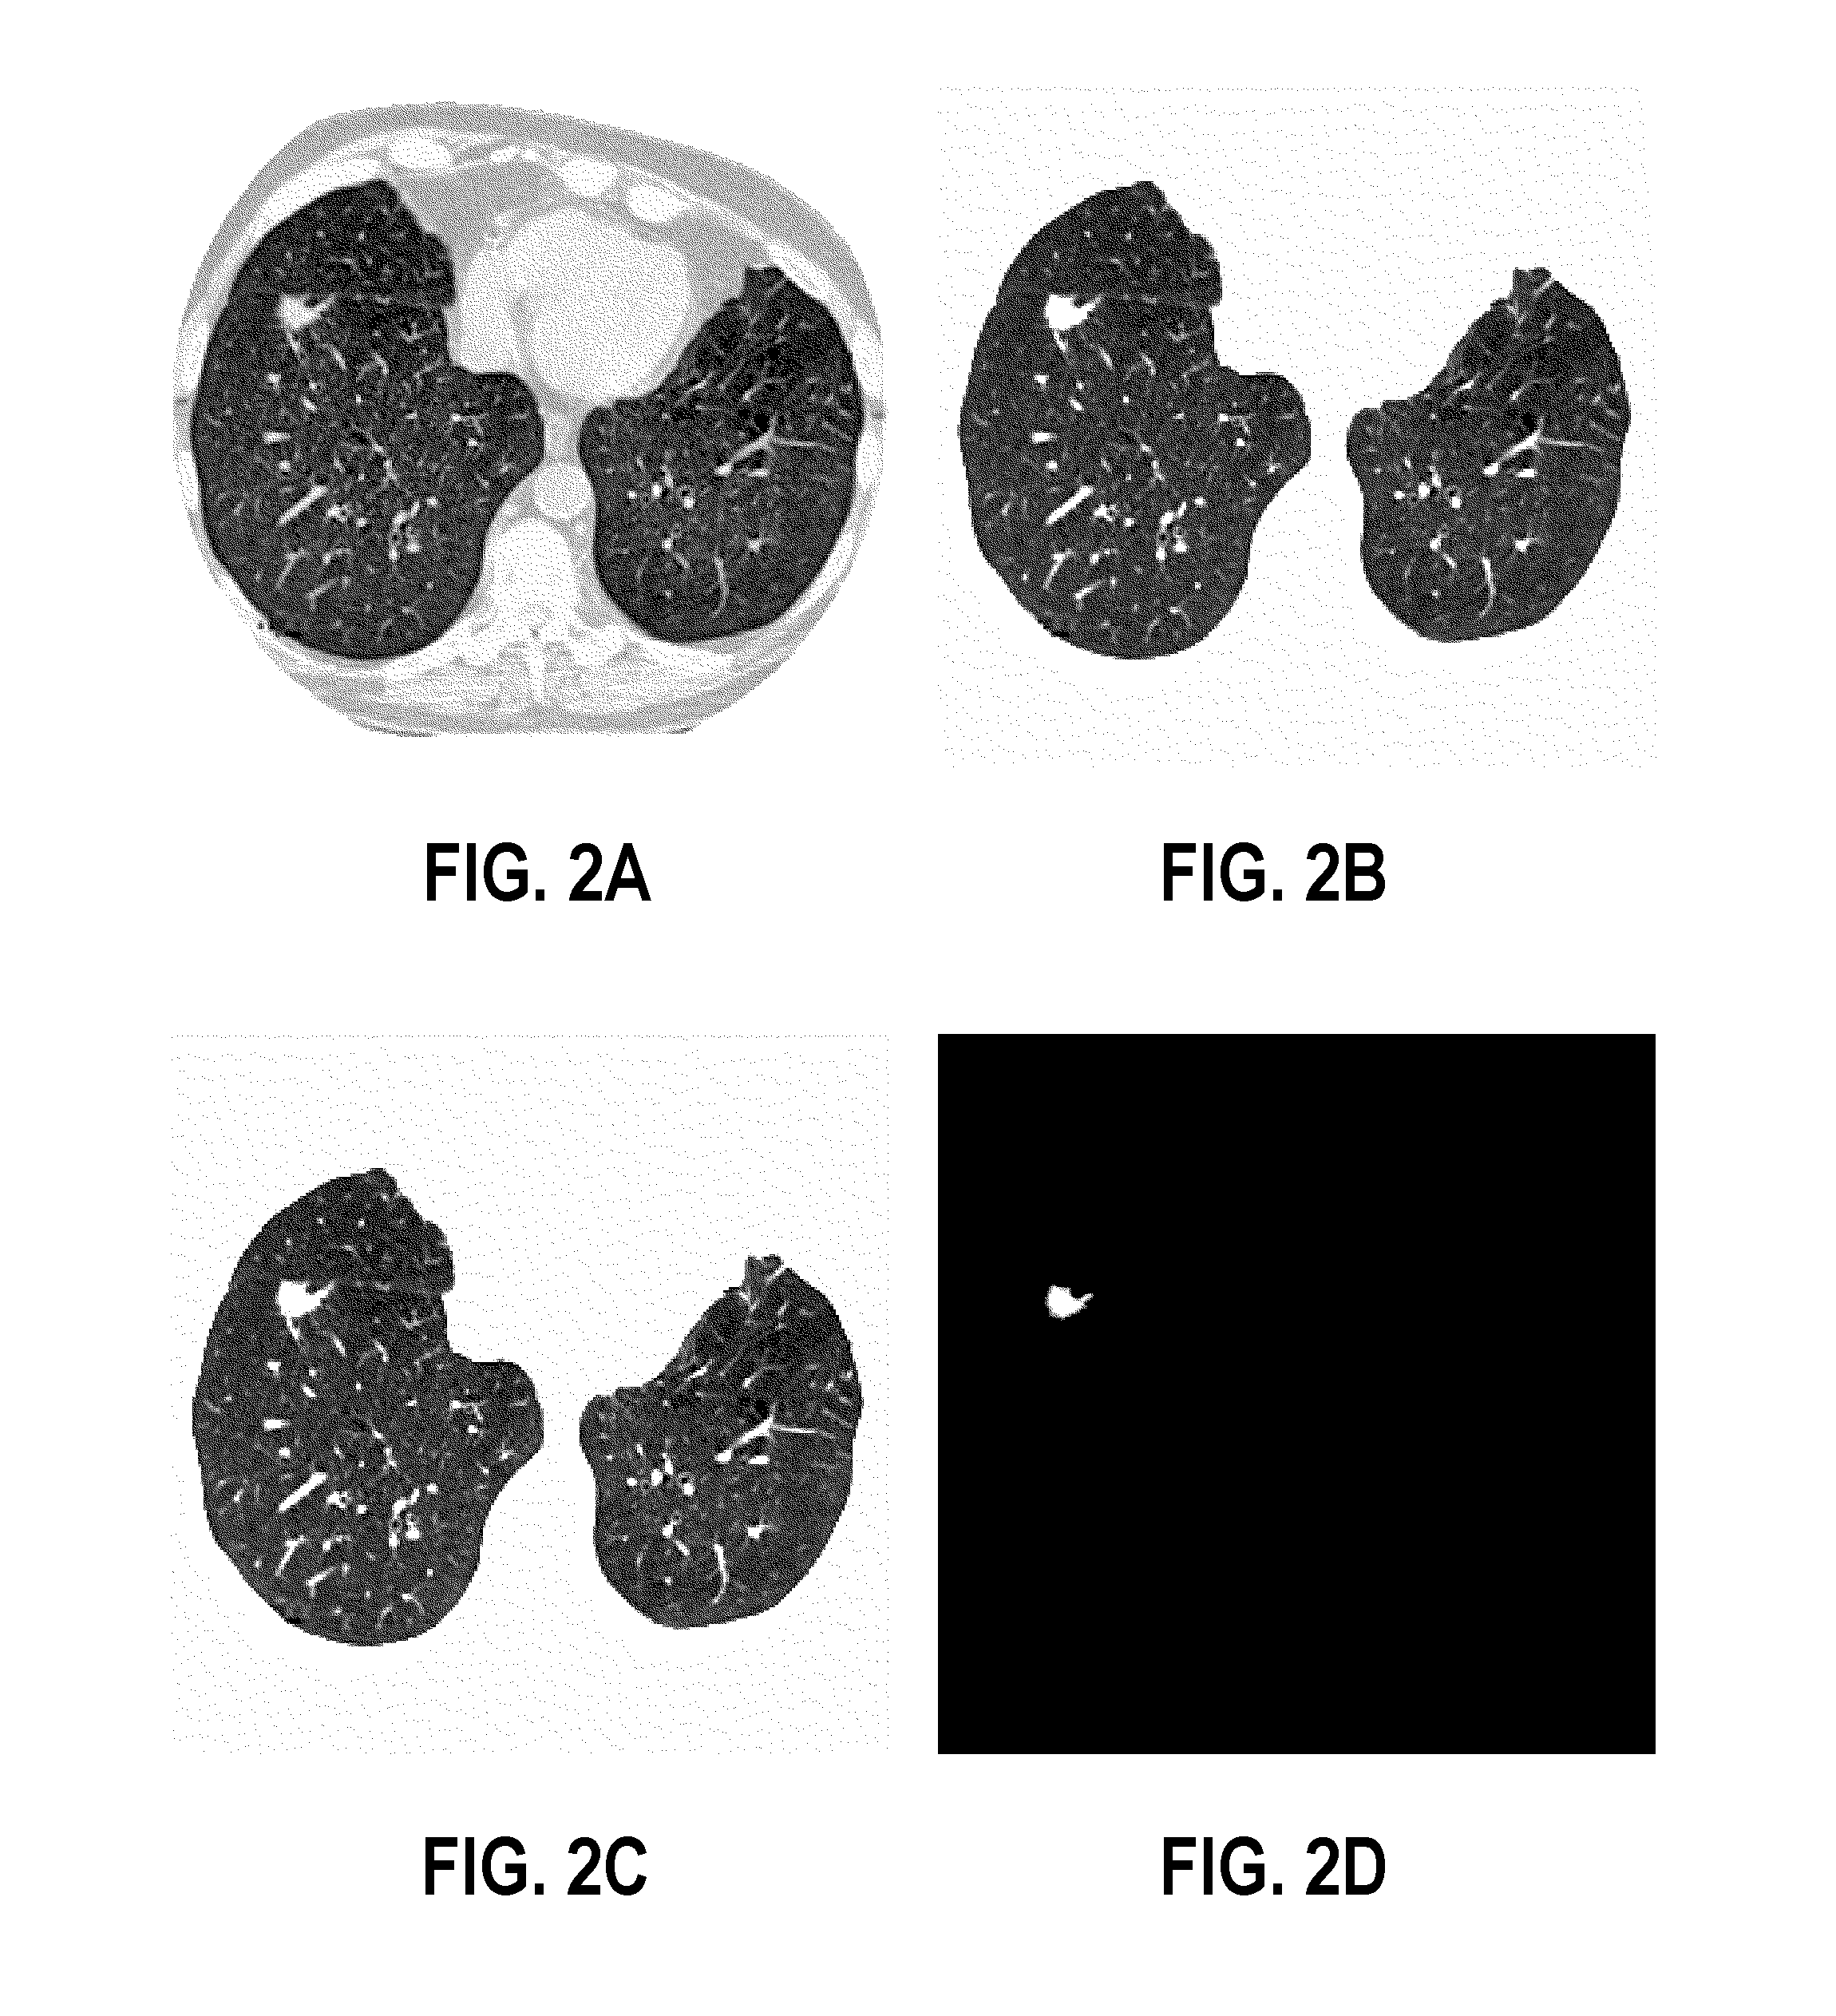 Computer aided diagnostic system incorporating shape analysis for diagnosing malignant lung nodules